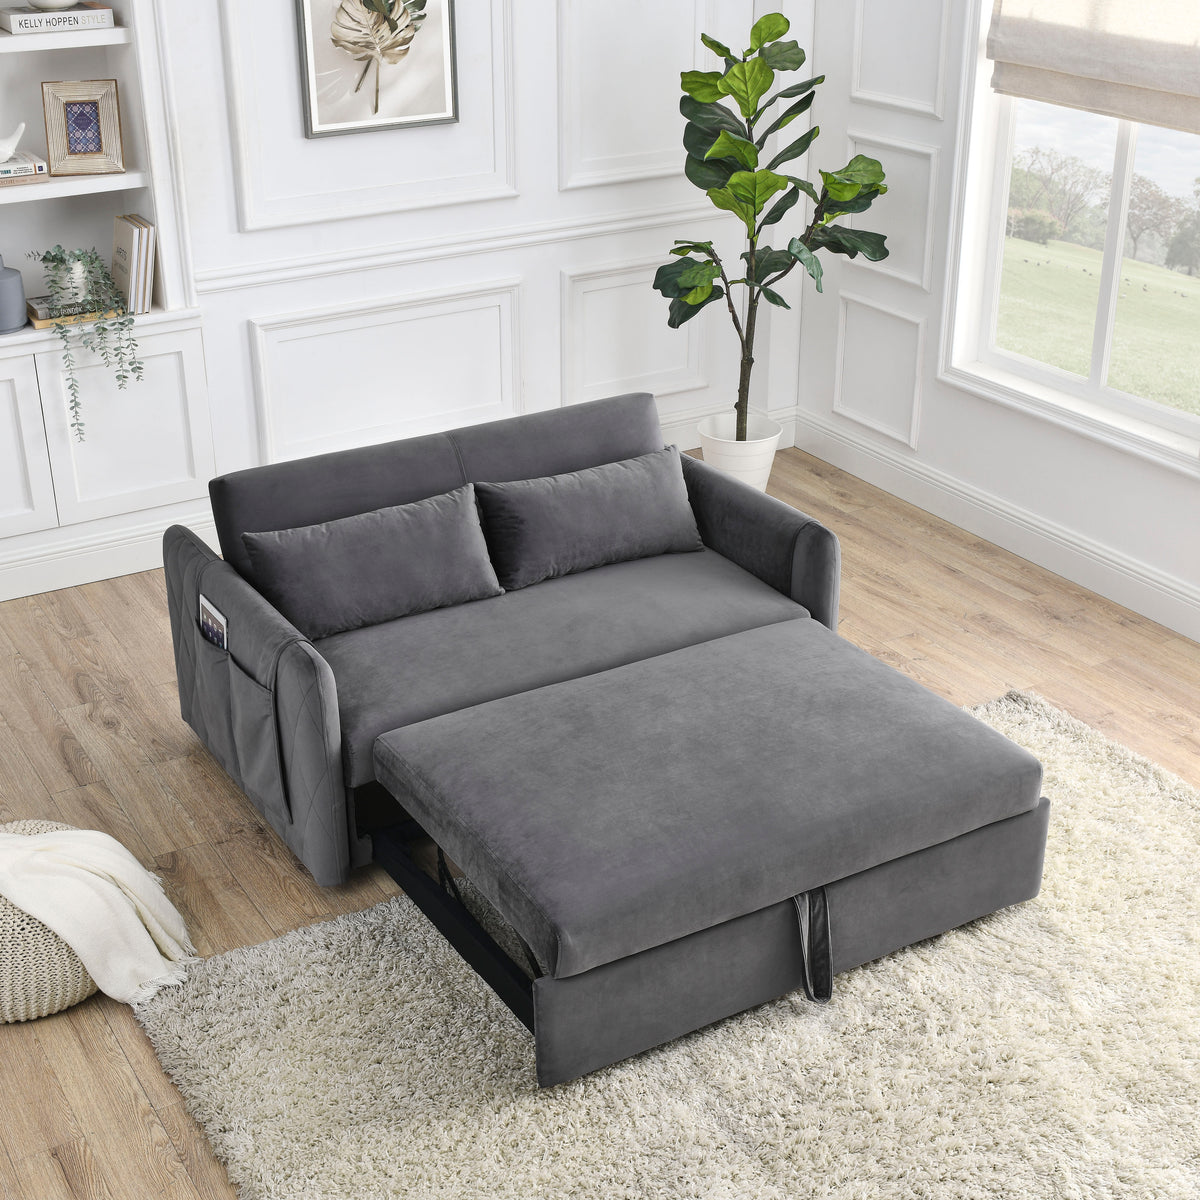 Ucloveria Sleeper Sofa Bed, Pull Out Couch Bed with 2 Detachable Arm P ...